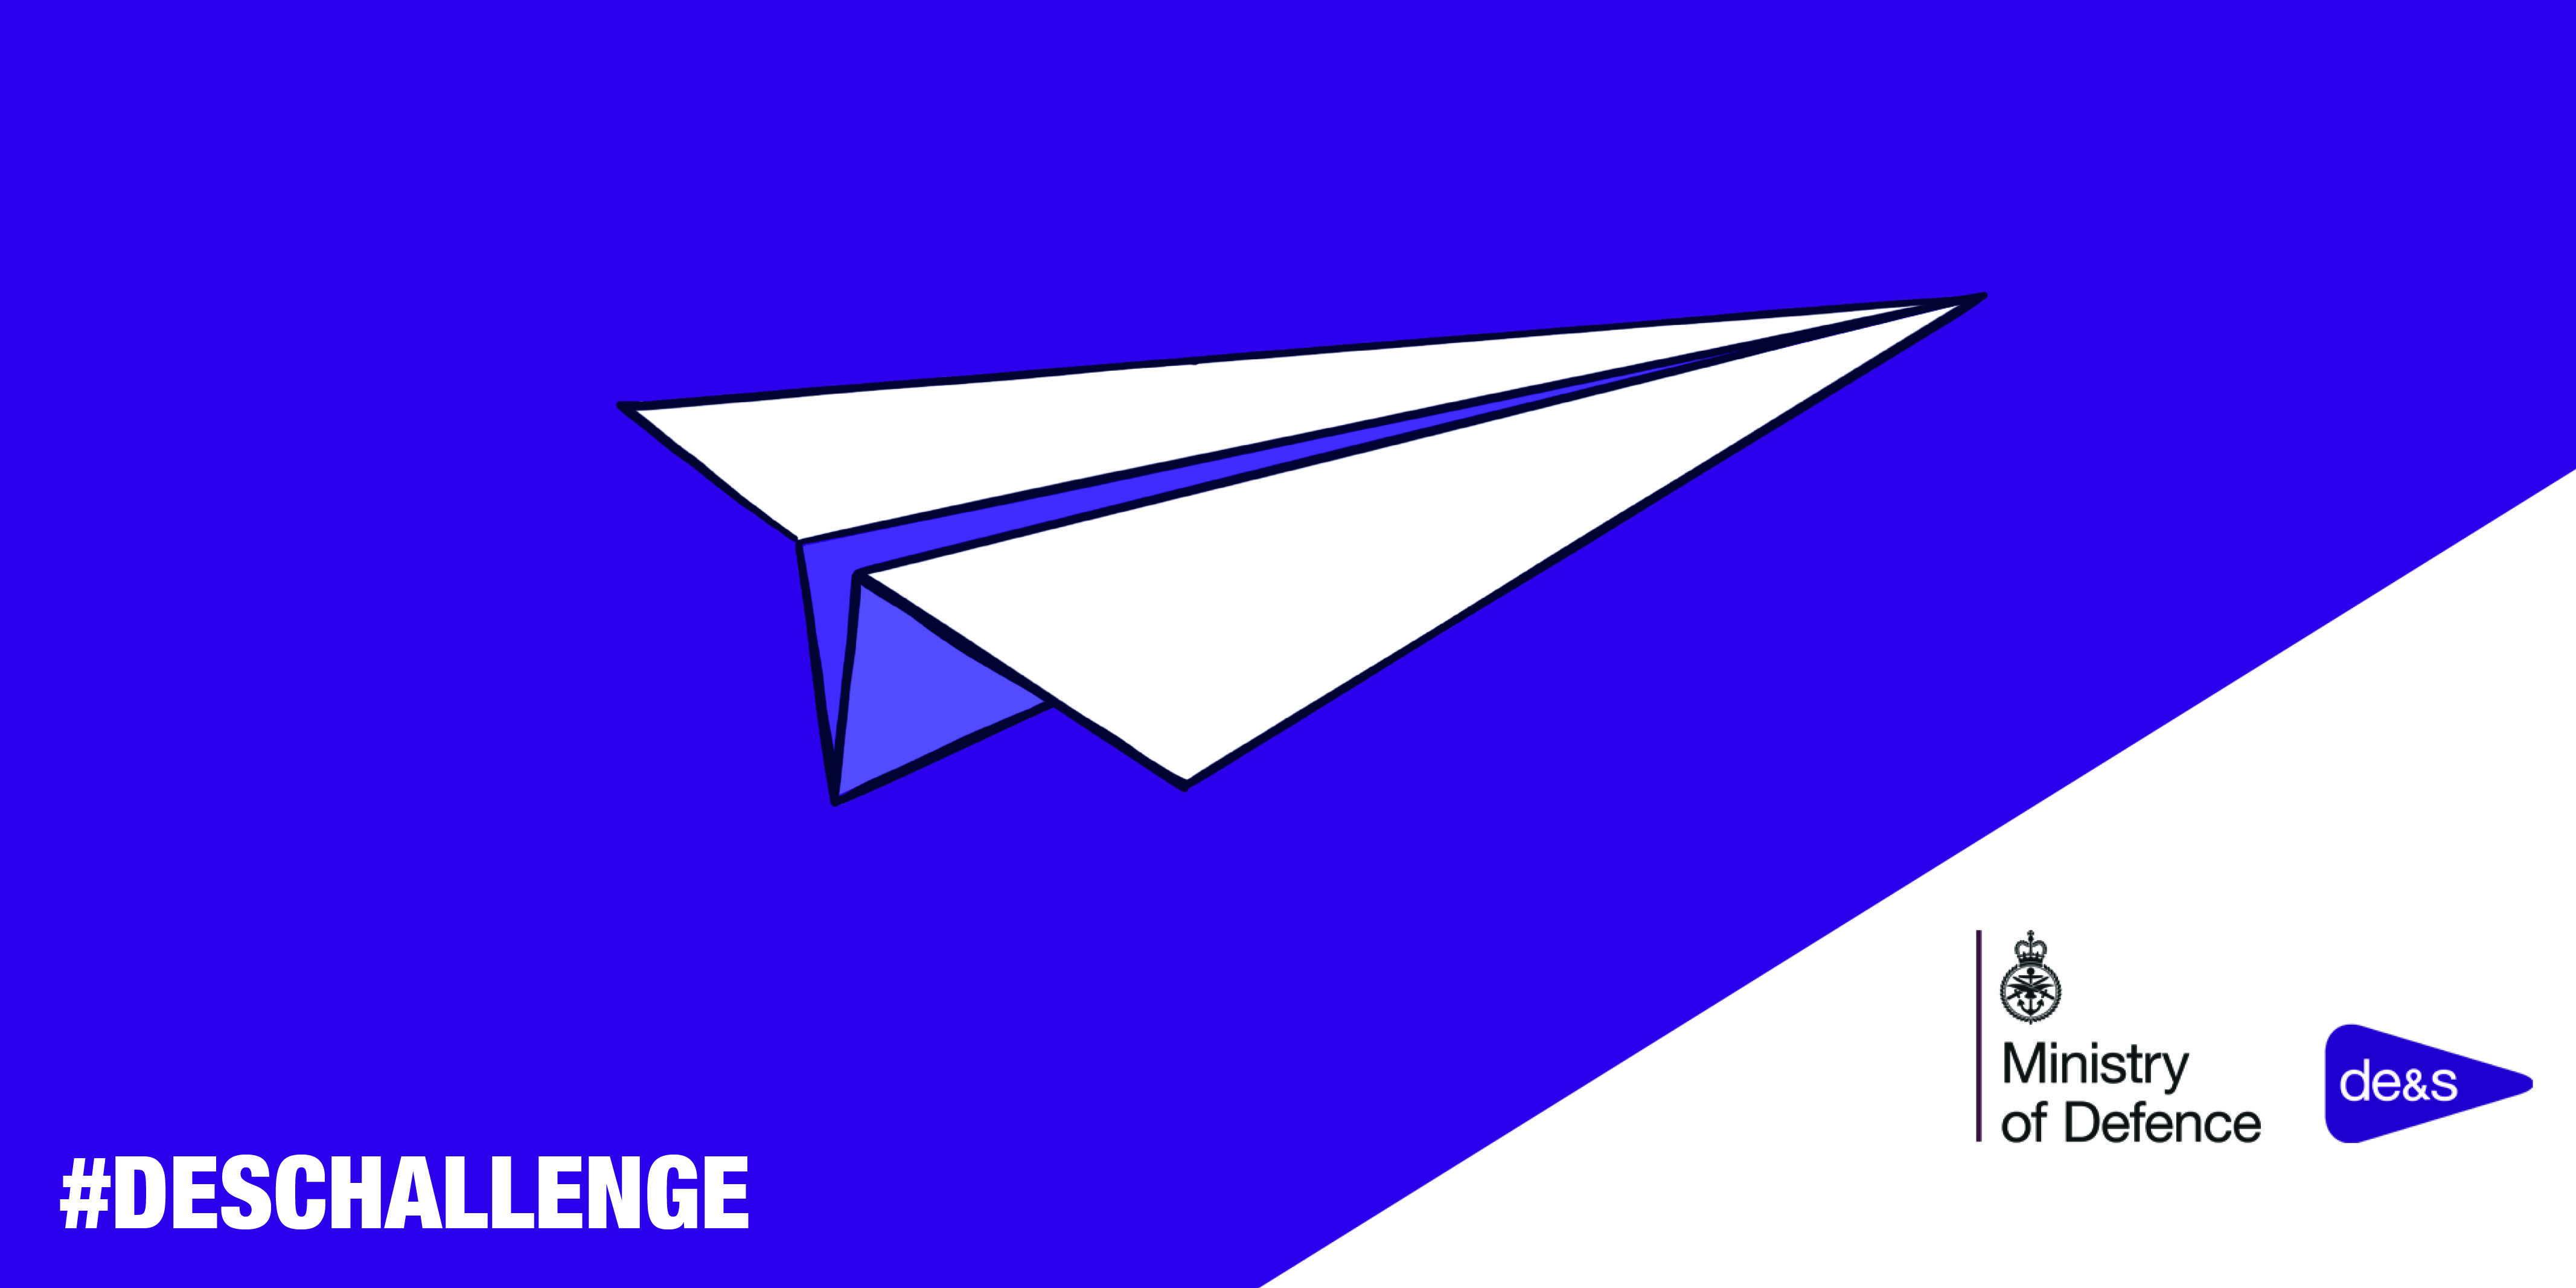 An image of a paper plane set against a purple background